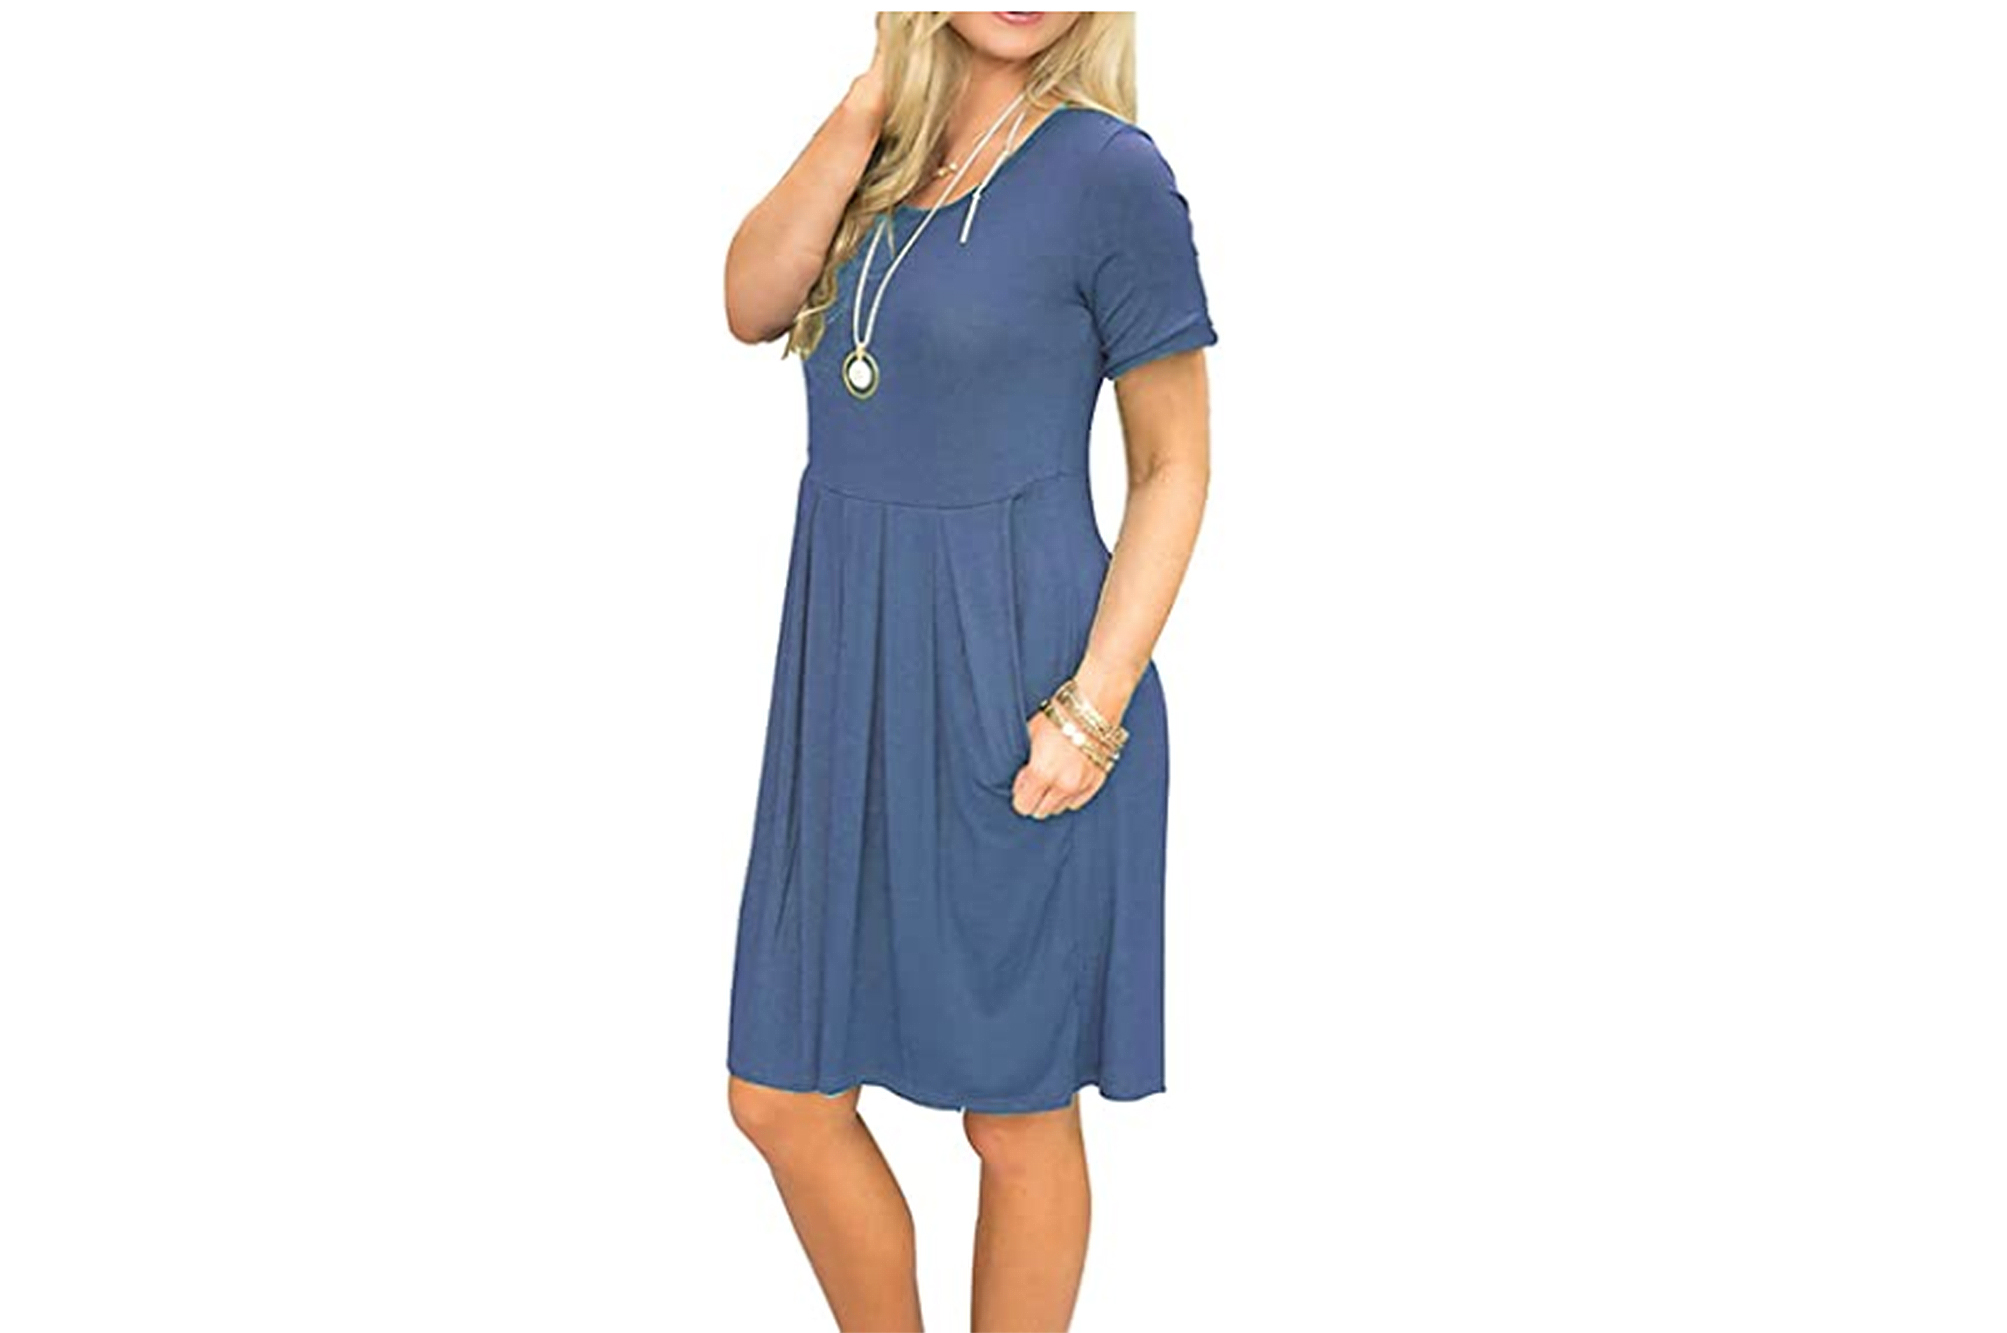 AUSELILY Women's Summer Casual T Shirt Dresses Short Sleeve Swing Dress with Pockets